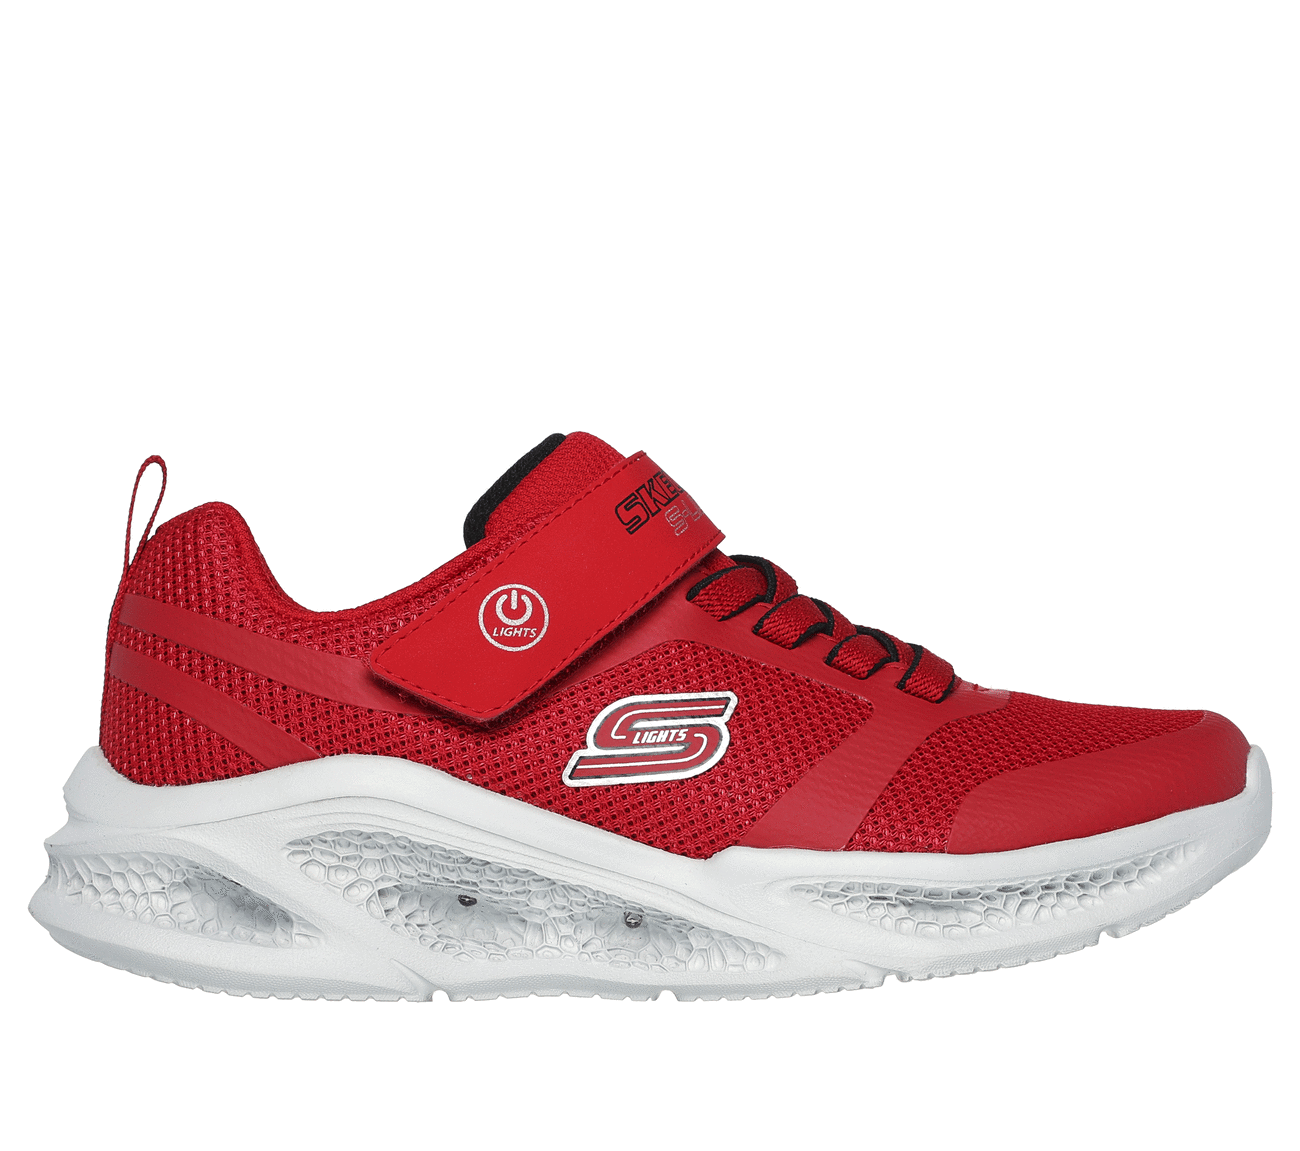 Shop RED Boys\' SKECHERS Shoes 